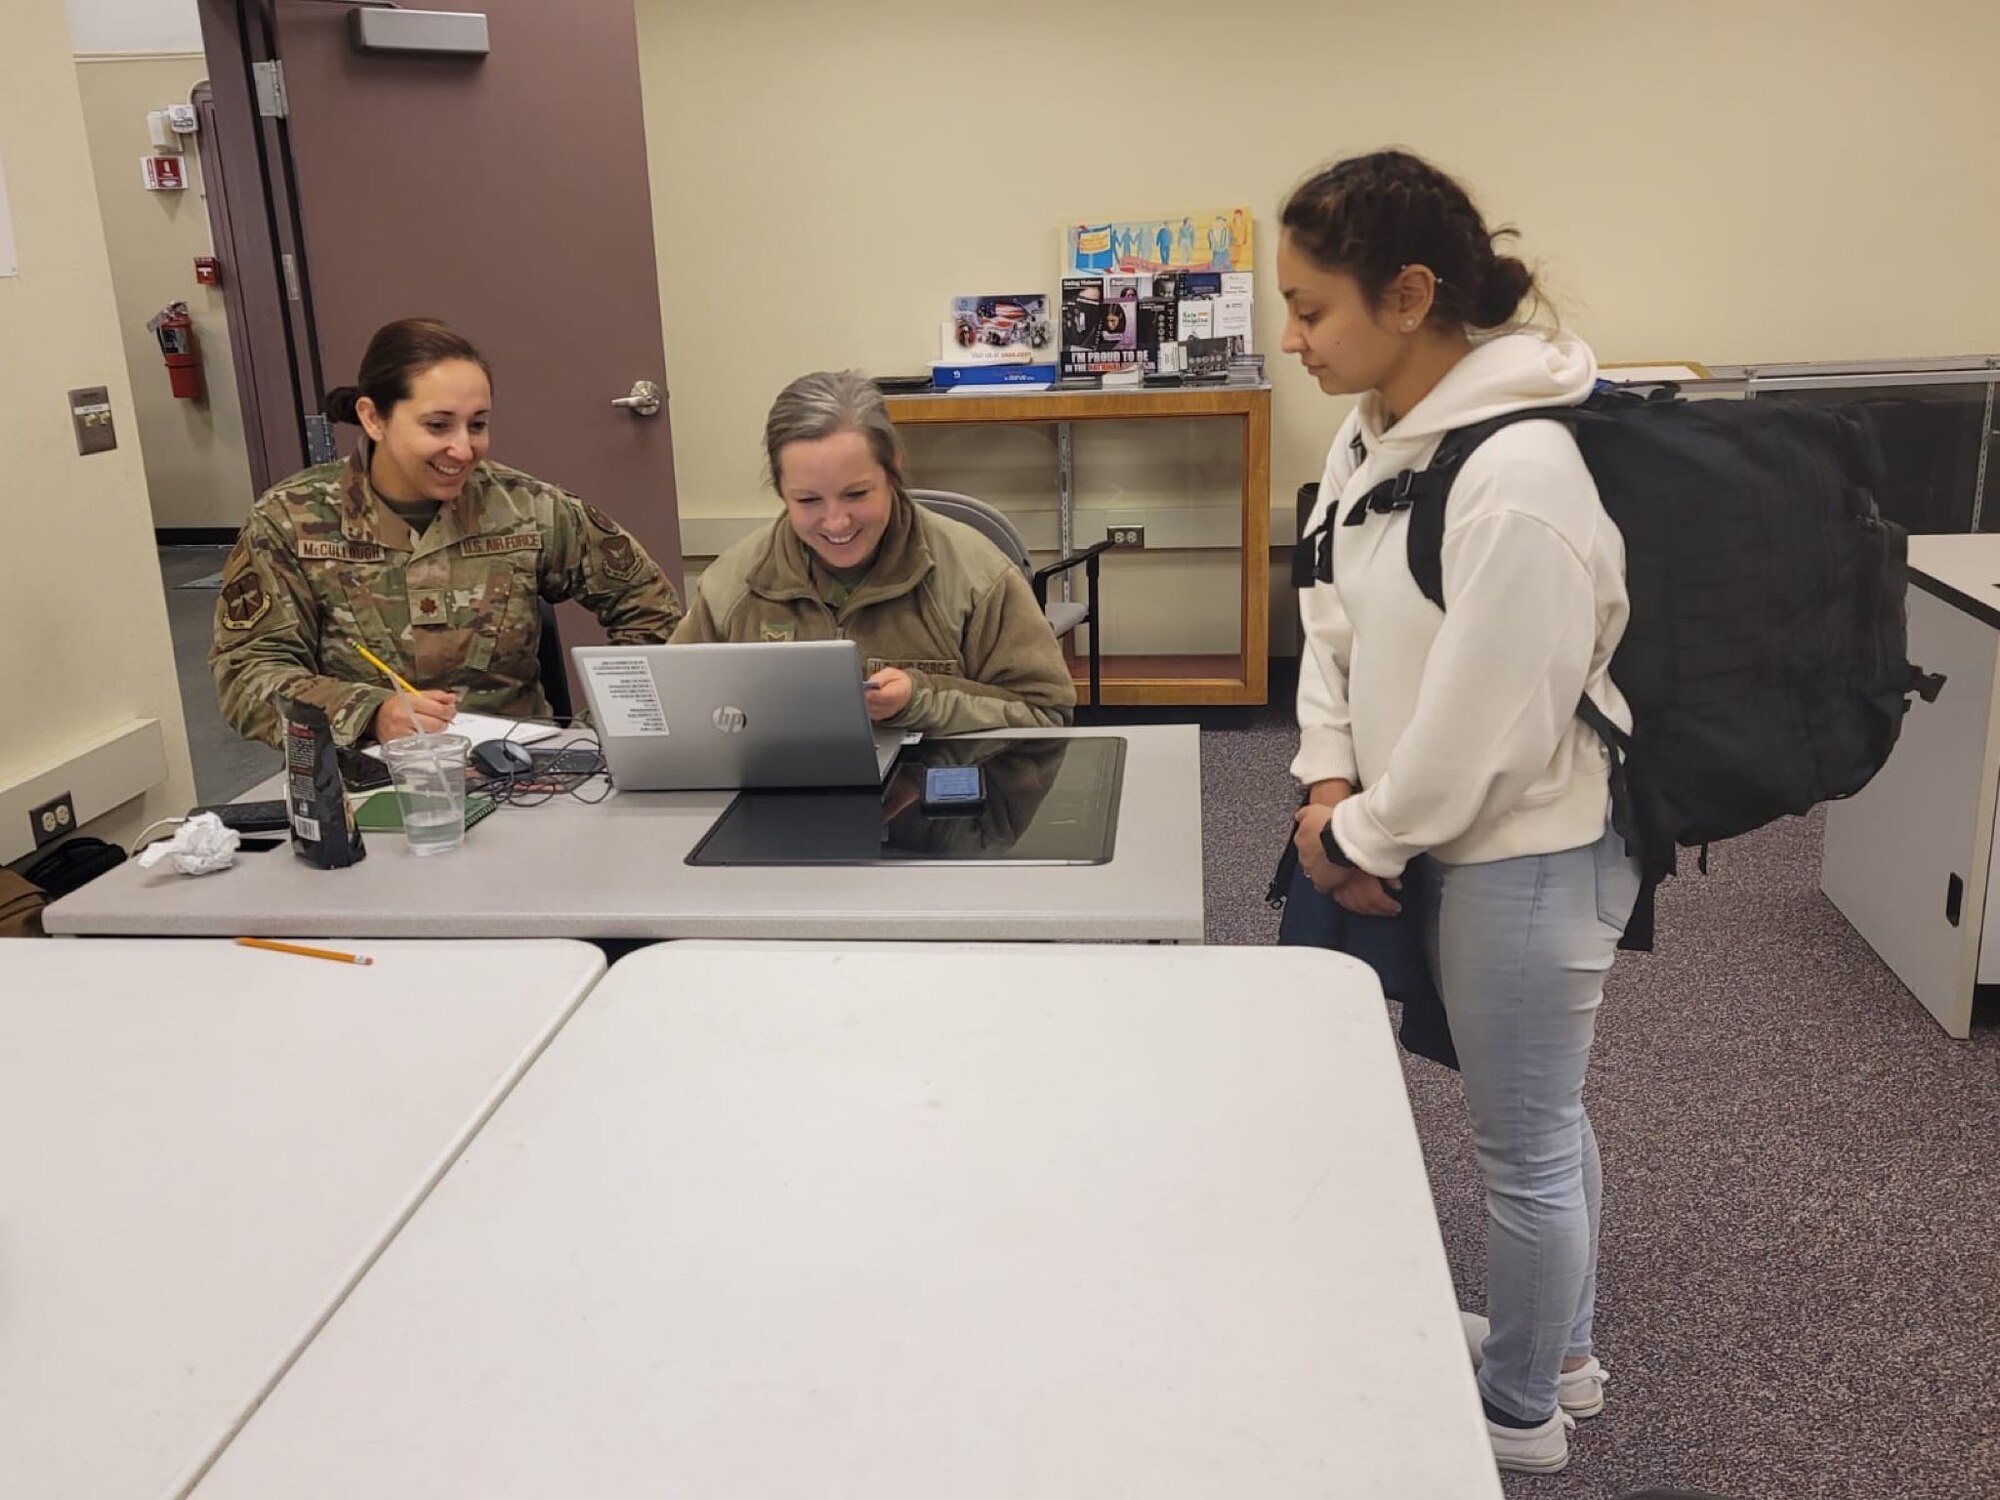 Two uniformed Airmen sit behind a table, one on a laptop, while an Airman in plain clothes stands to the right.